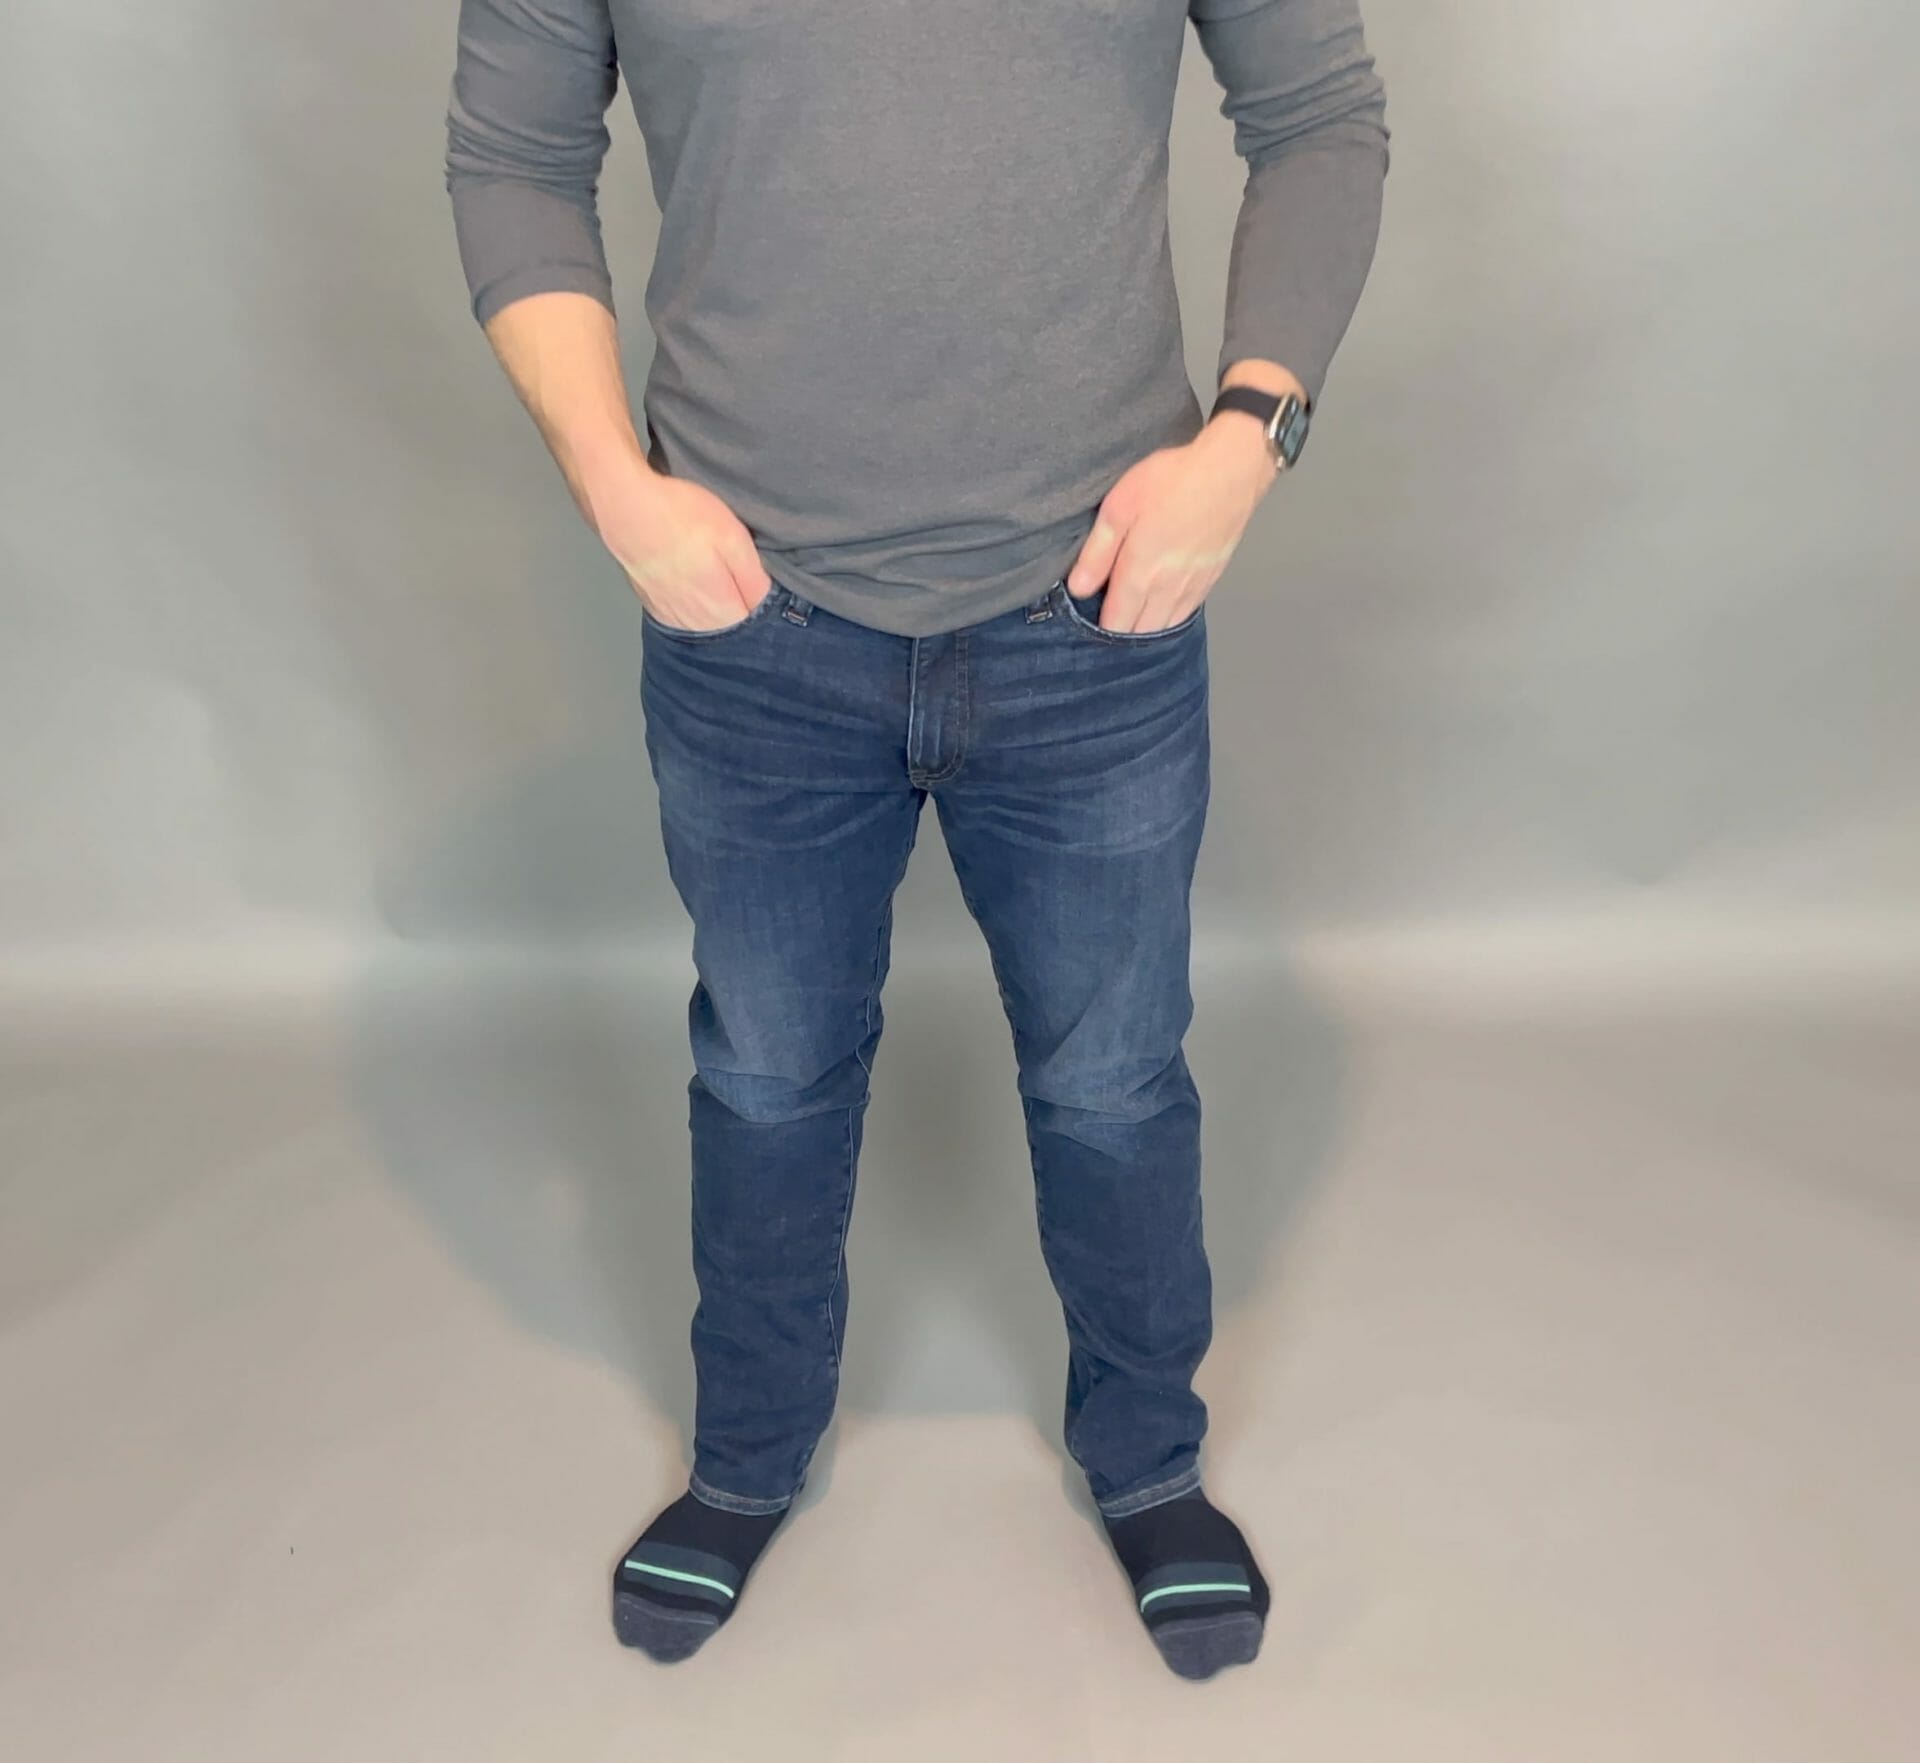 Revtown Jeans Review: Are They The Ultimate Holy Grail of Jeans? 16